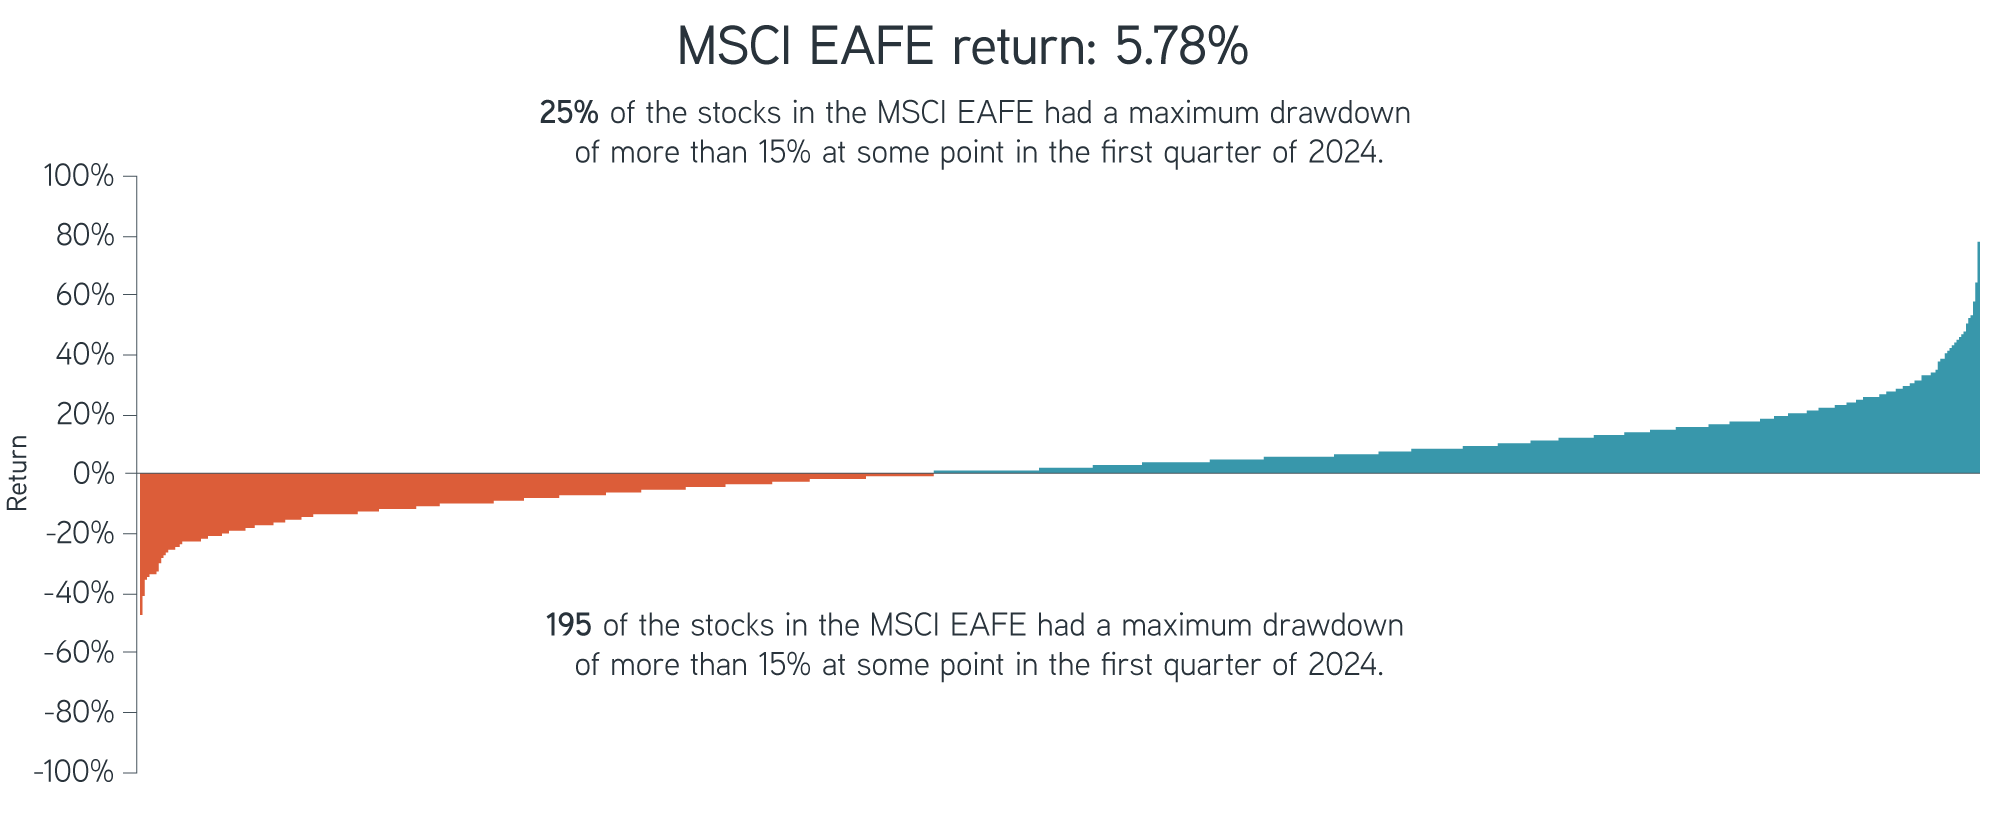 25% of the stocks in the MSCI EAFE had a maximum drawdown of more than 15% at some point in the first quarter of 2024.  195 of the stocks in the MSCI EAFE had a maximum drawdown of more than 15% at some point in the first quarter of 2024.